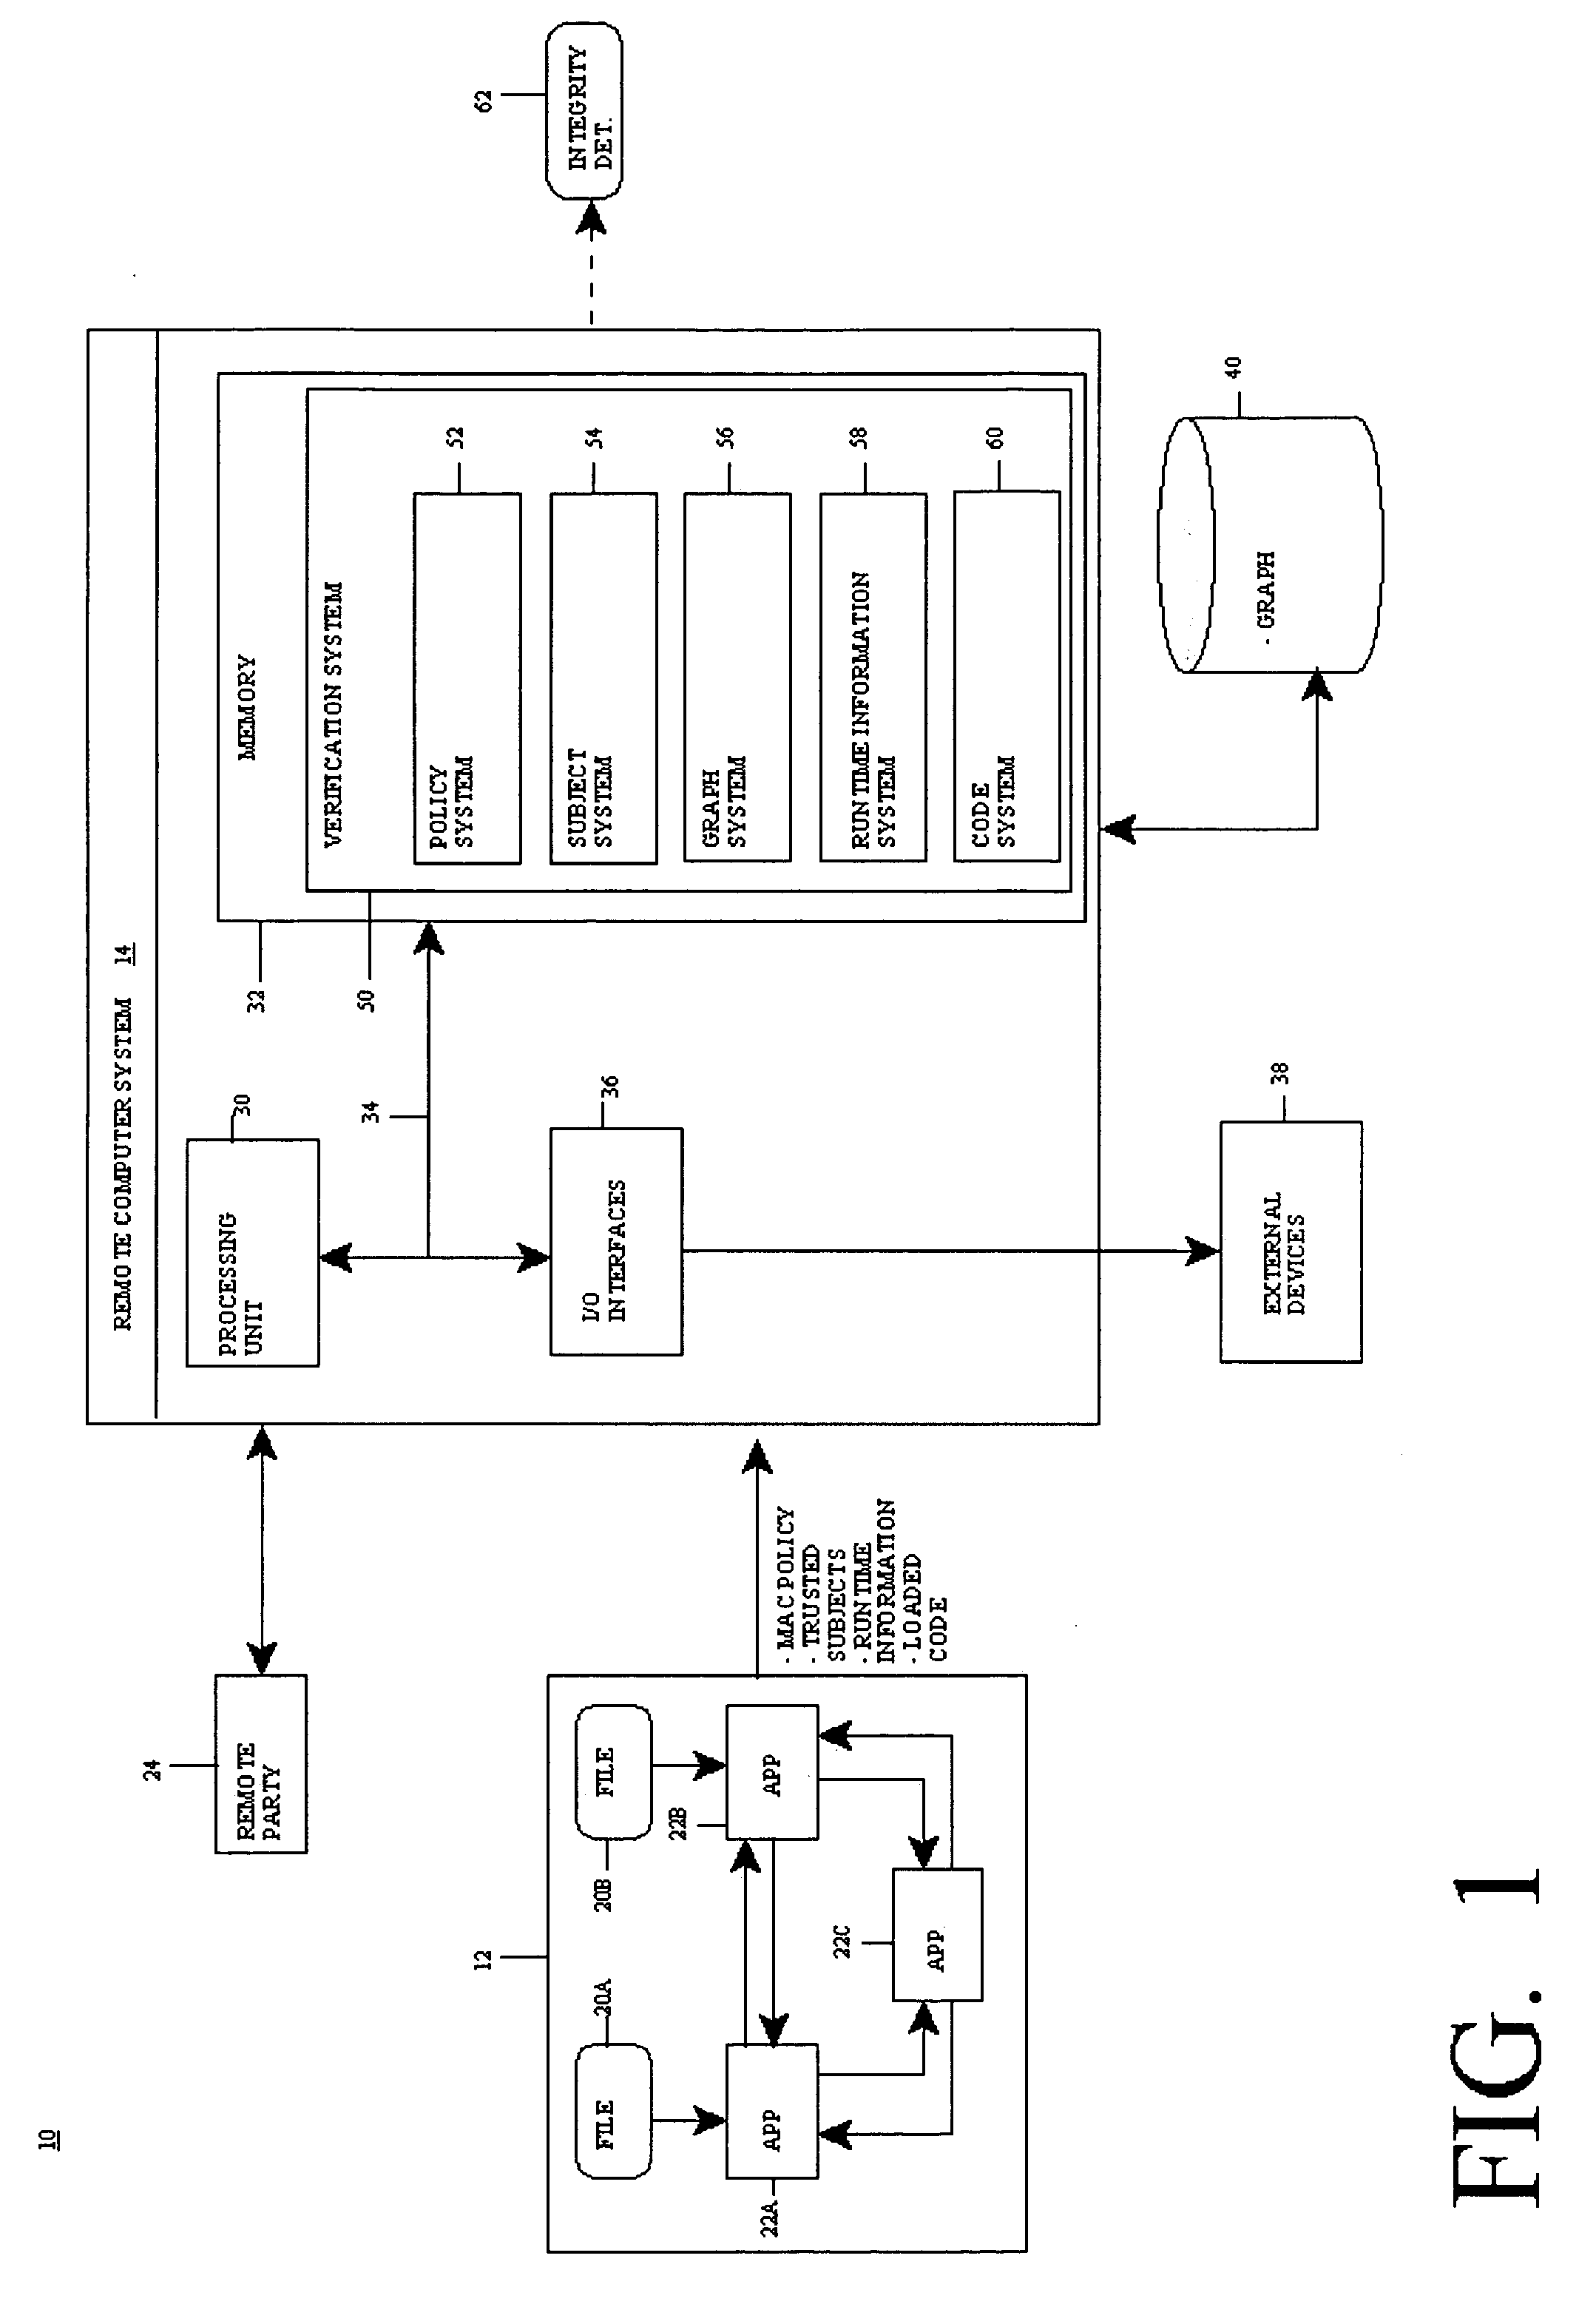 Method, system and program product for remotely verifying integrity of a system